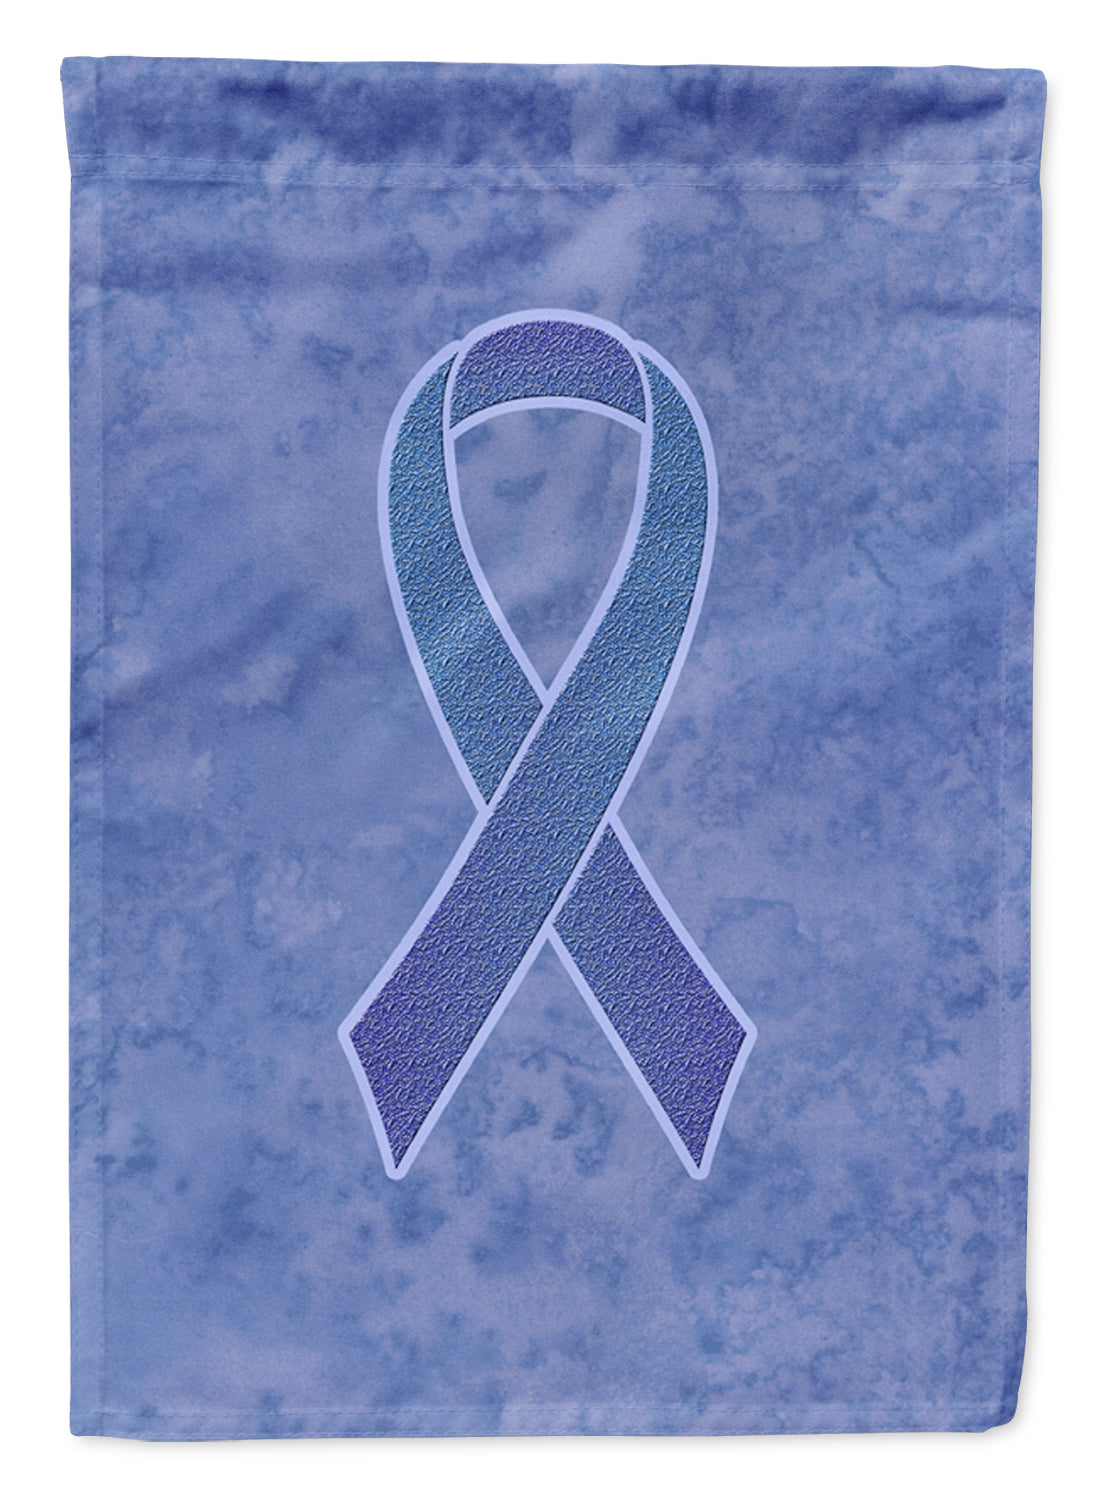 Periwinkle Blue Ribbon for Esophageal and Stomach Cancer Awareness Flag Garden Size